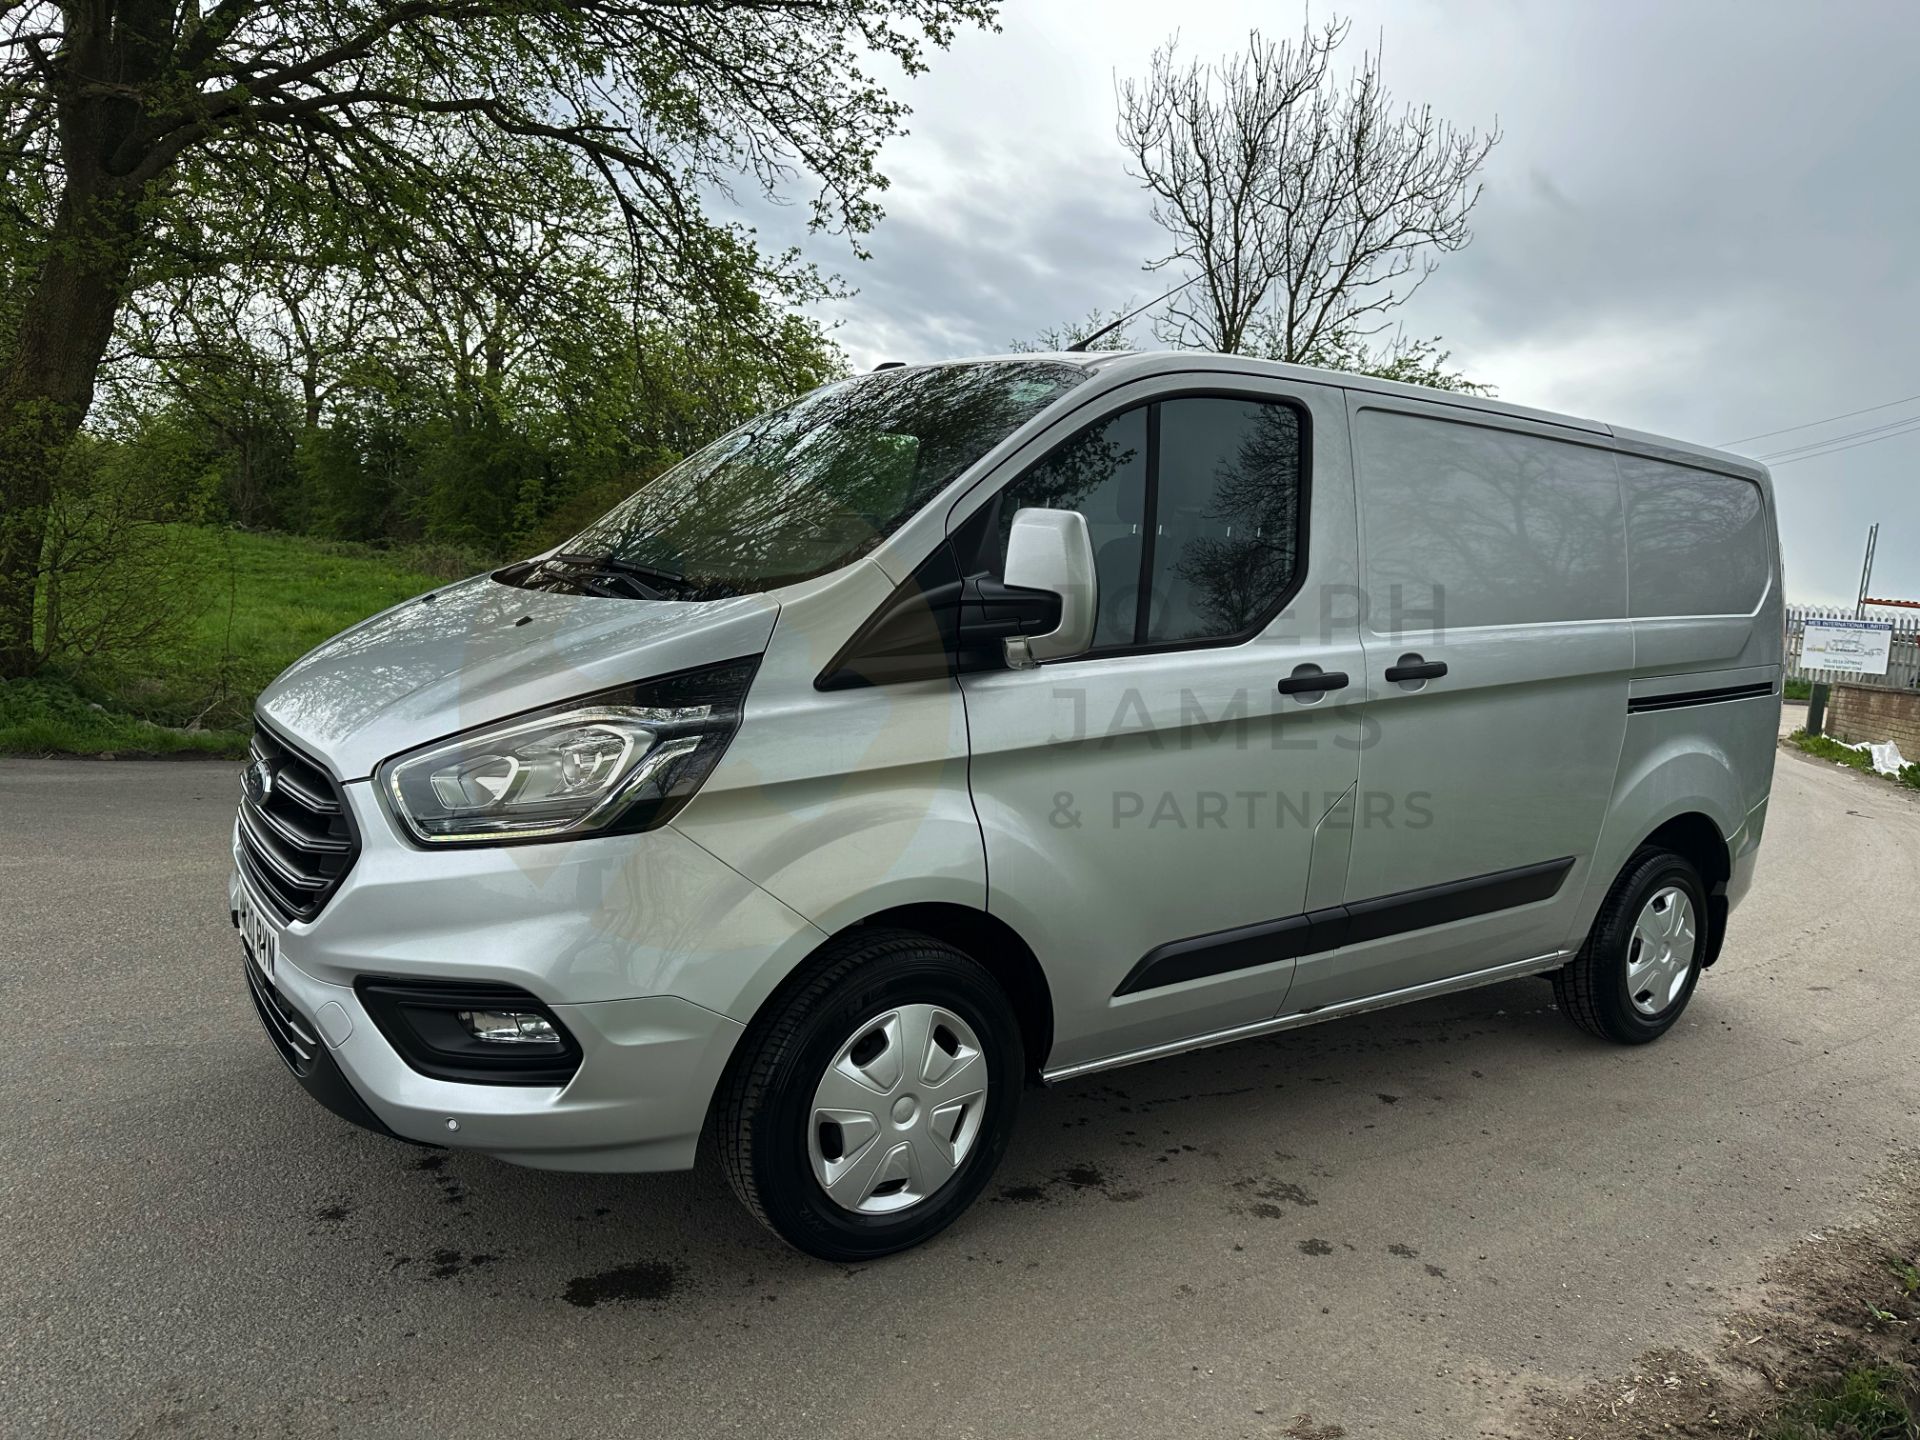 FORD TRANSIT CUSTOM "TREND" 2.0TDCI (130) 20 REG -1 OWNER- SILVER -GREAT SPEC -LOW MILEAGE - Image 7 of 38